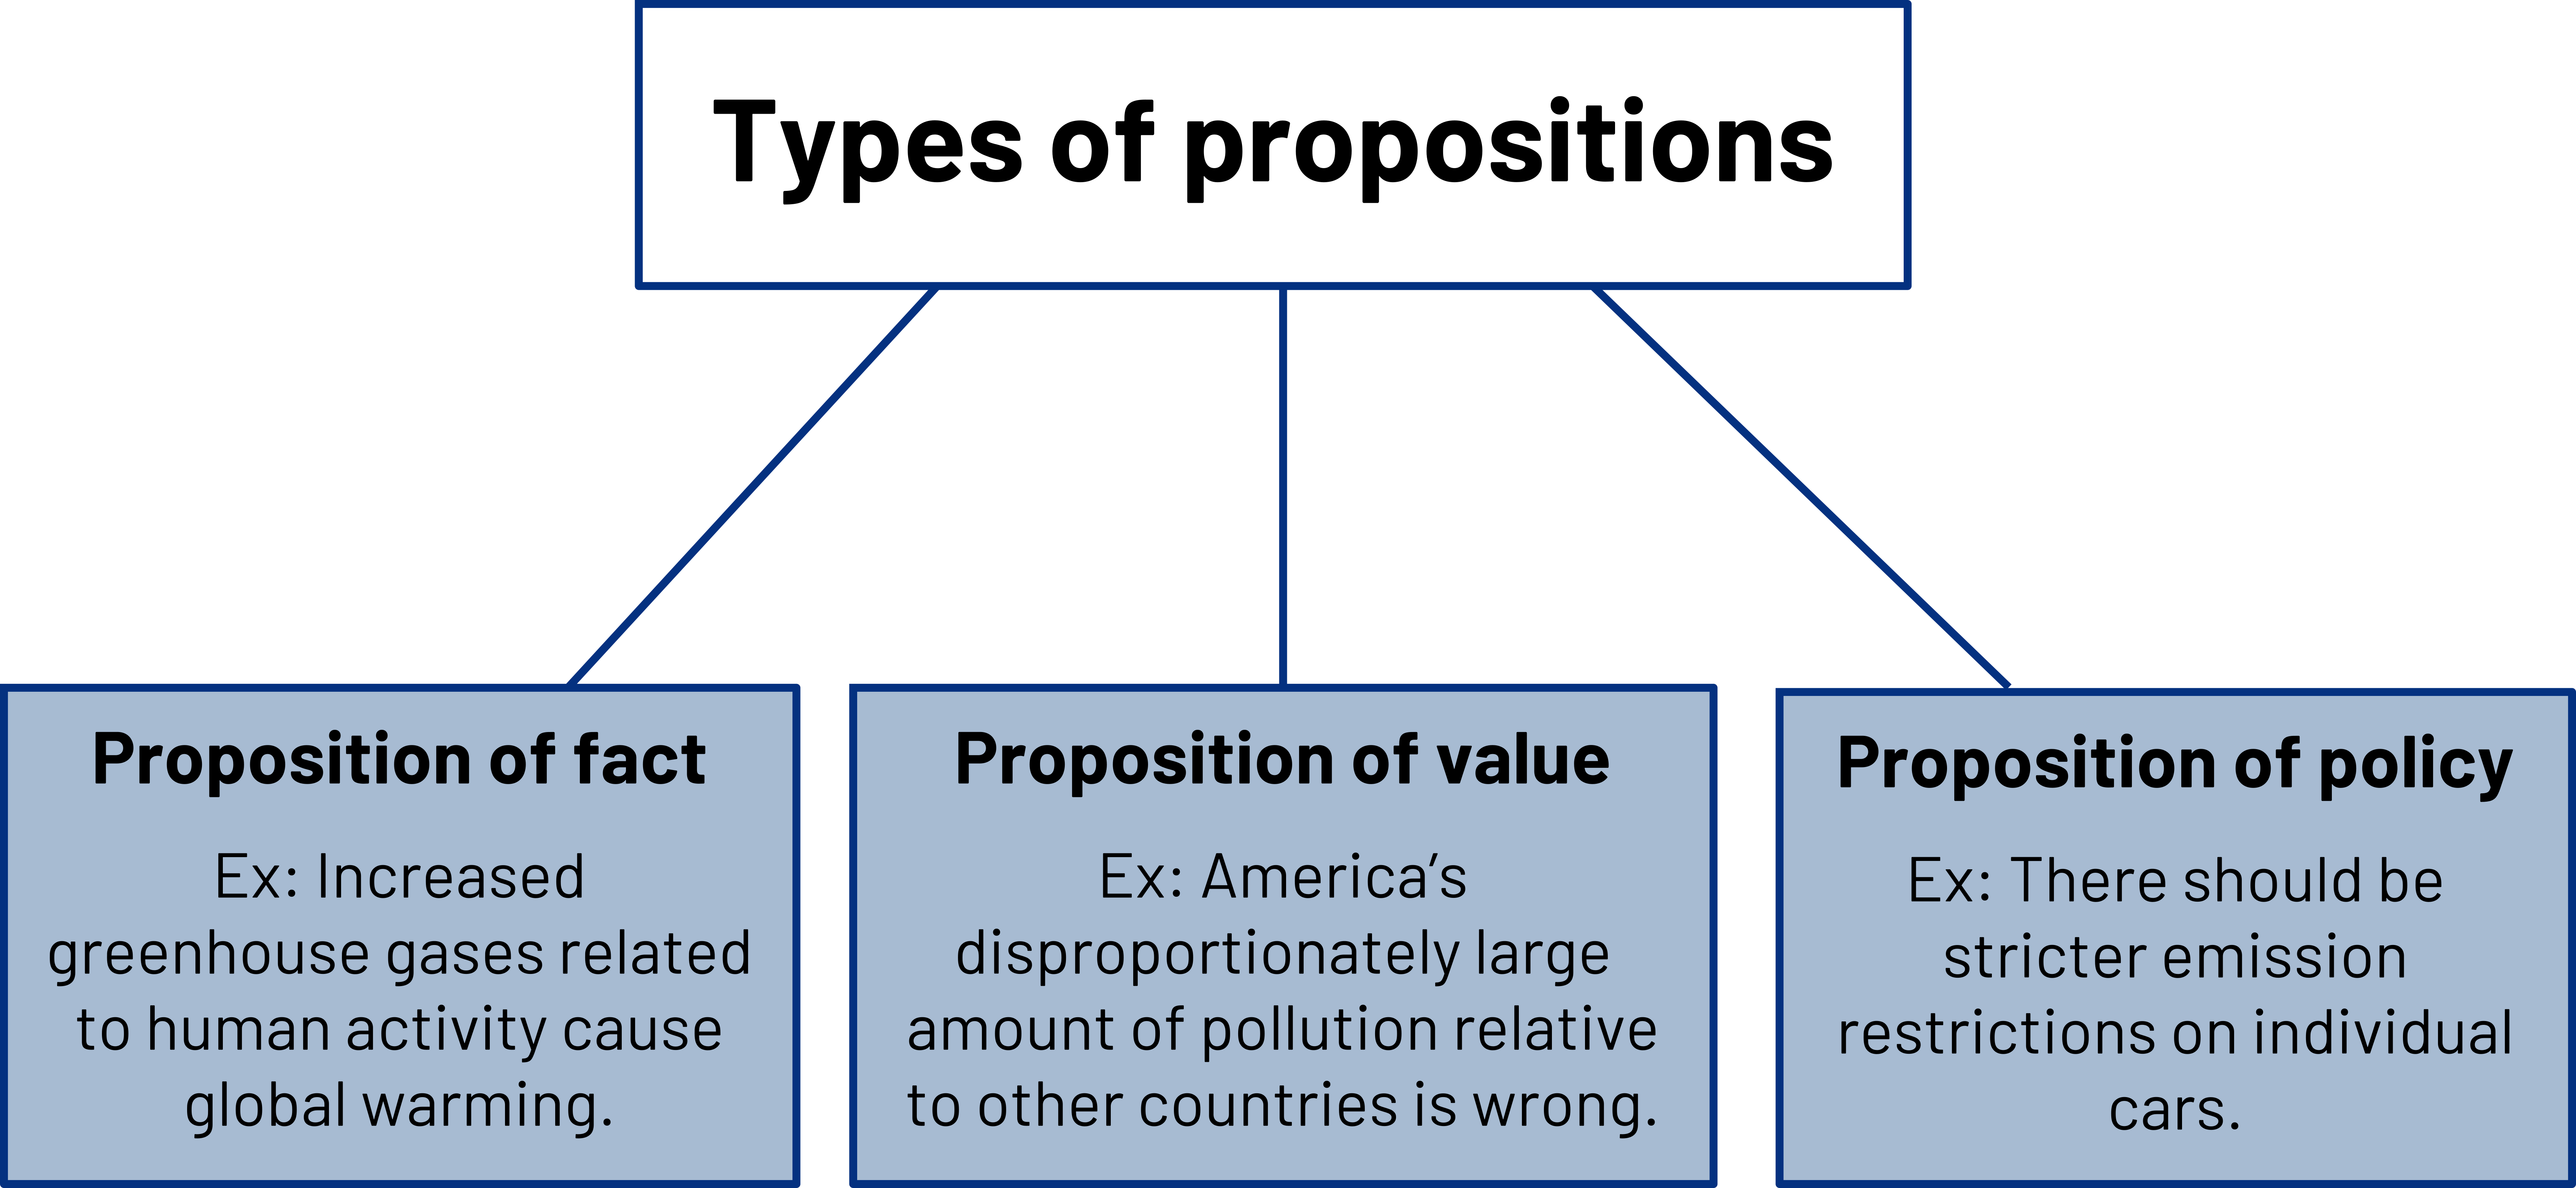 Types of propositions. Proposition of fact, ex: Increased greenhouse gases related to human activity cause global warming. Proposition of value, ex: America's disproportionately large amount of pollution relative to other countries is wrong. Proposition of policy, ex: There should be stricter emission restrictions on individual cars.